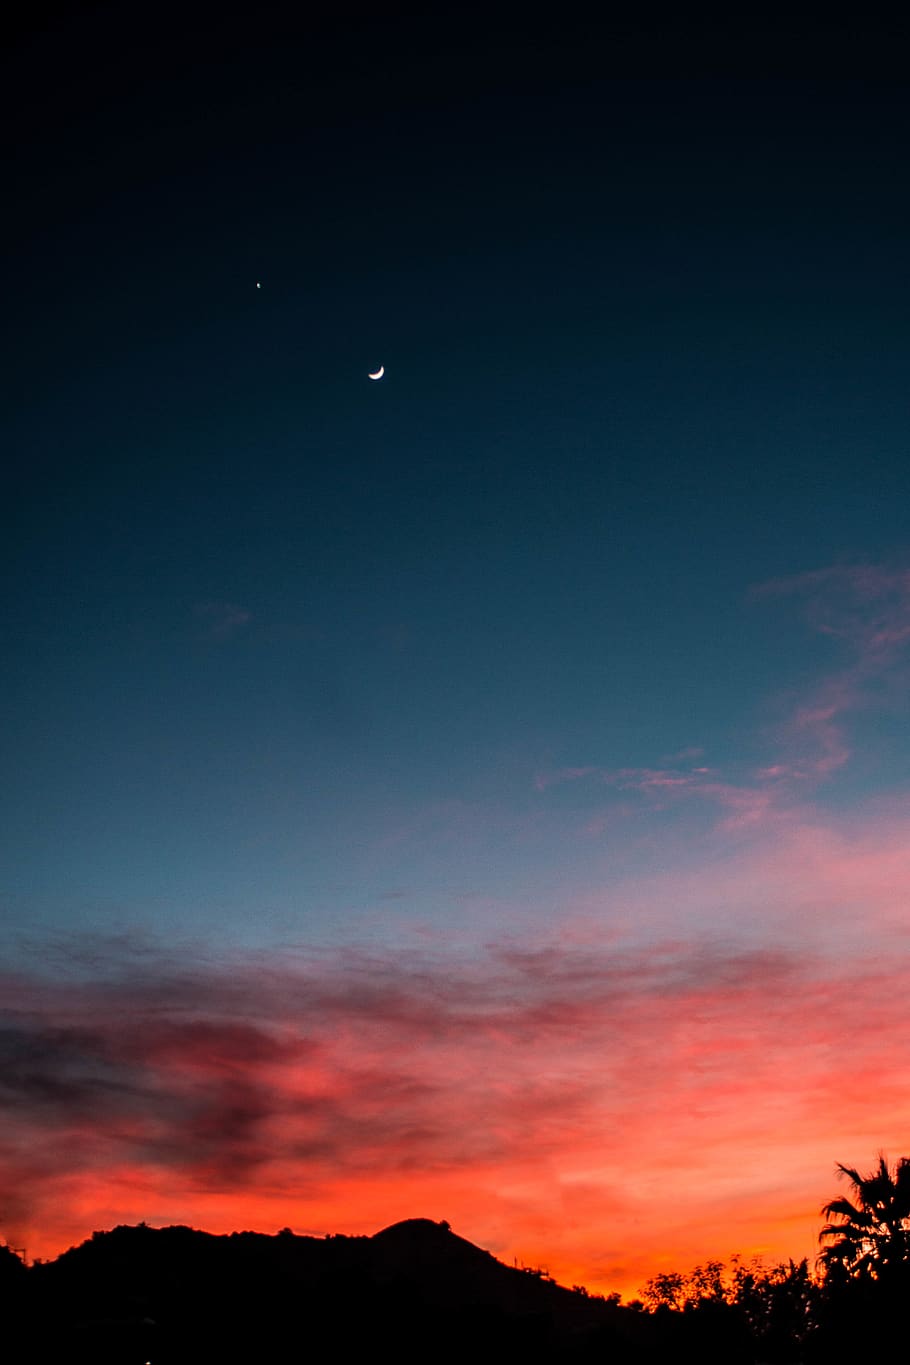 HD wallpaper: sunset, moon, arizona, canon, pink sky, clouds, beauty in ...